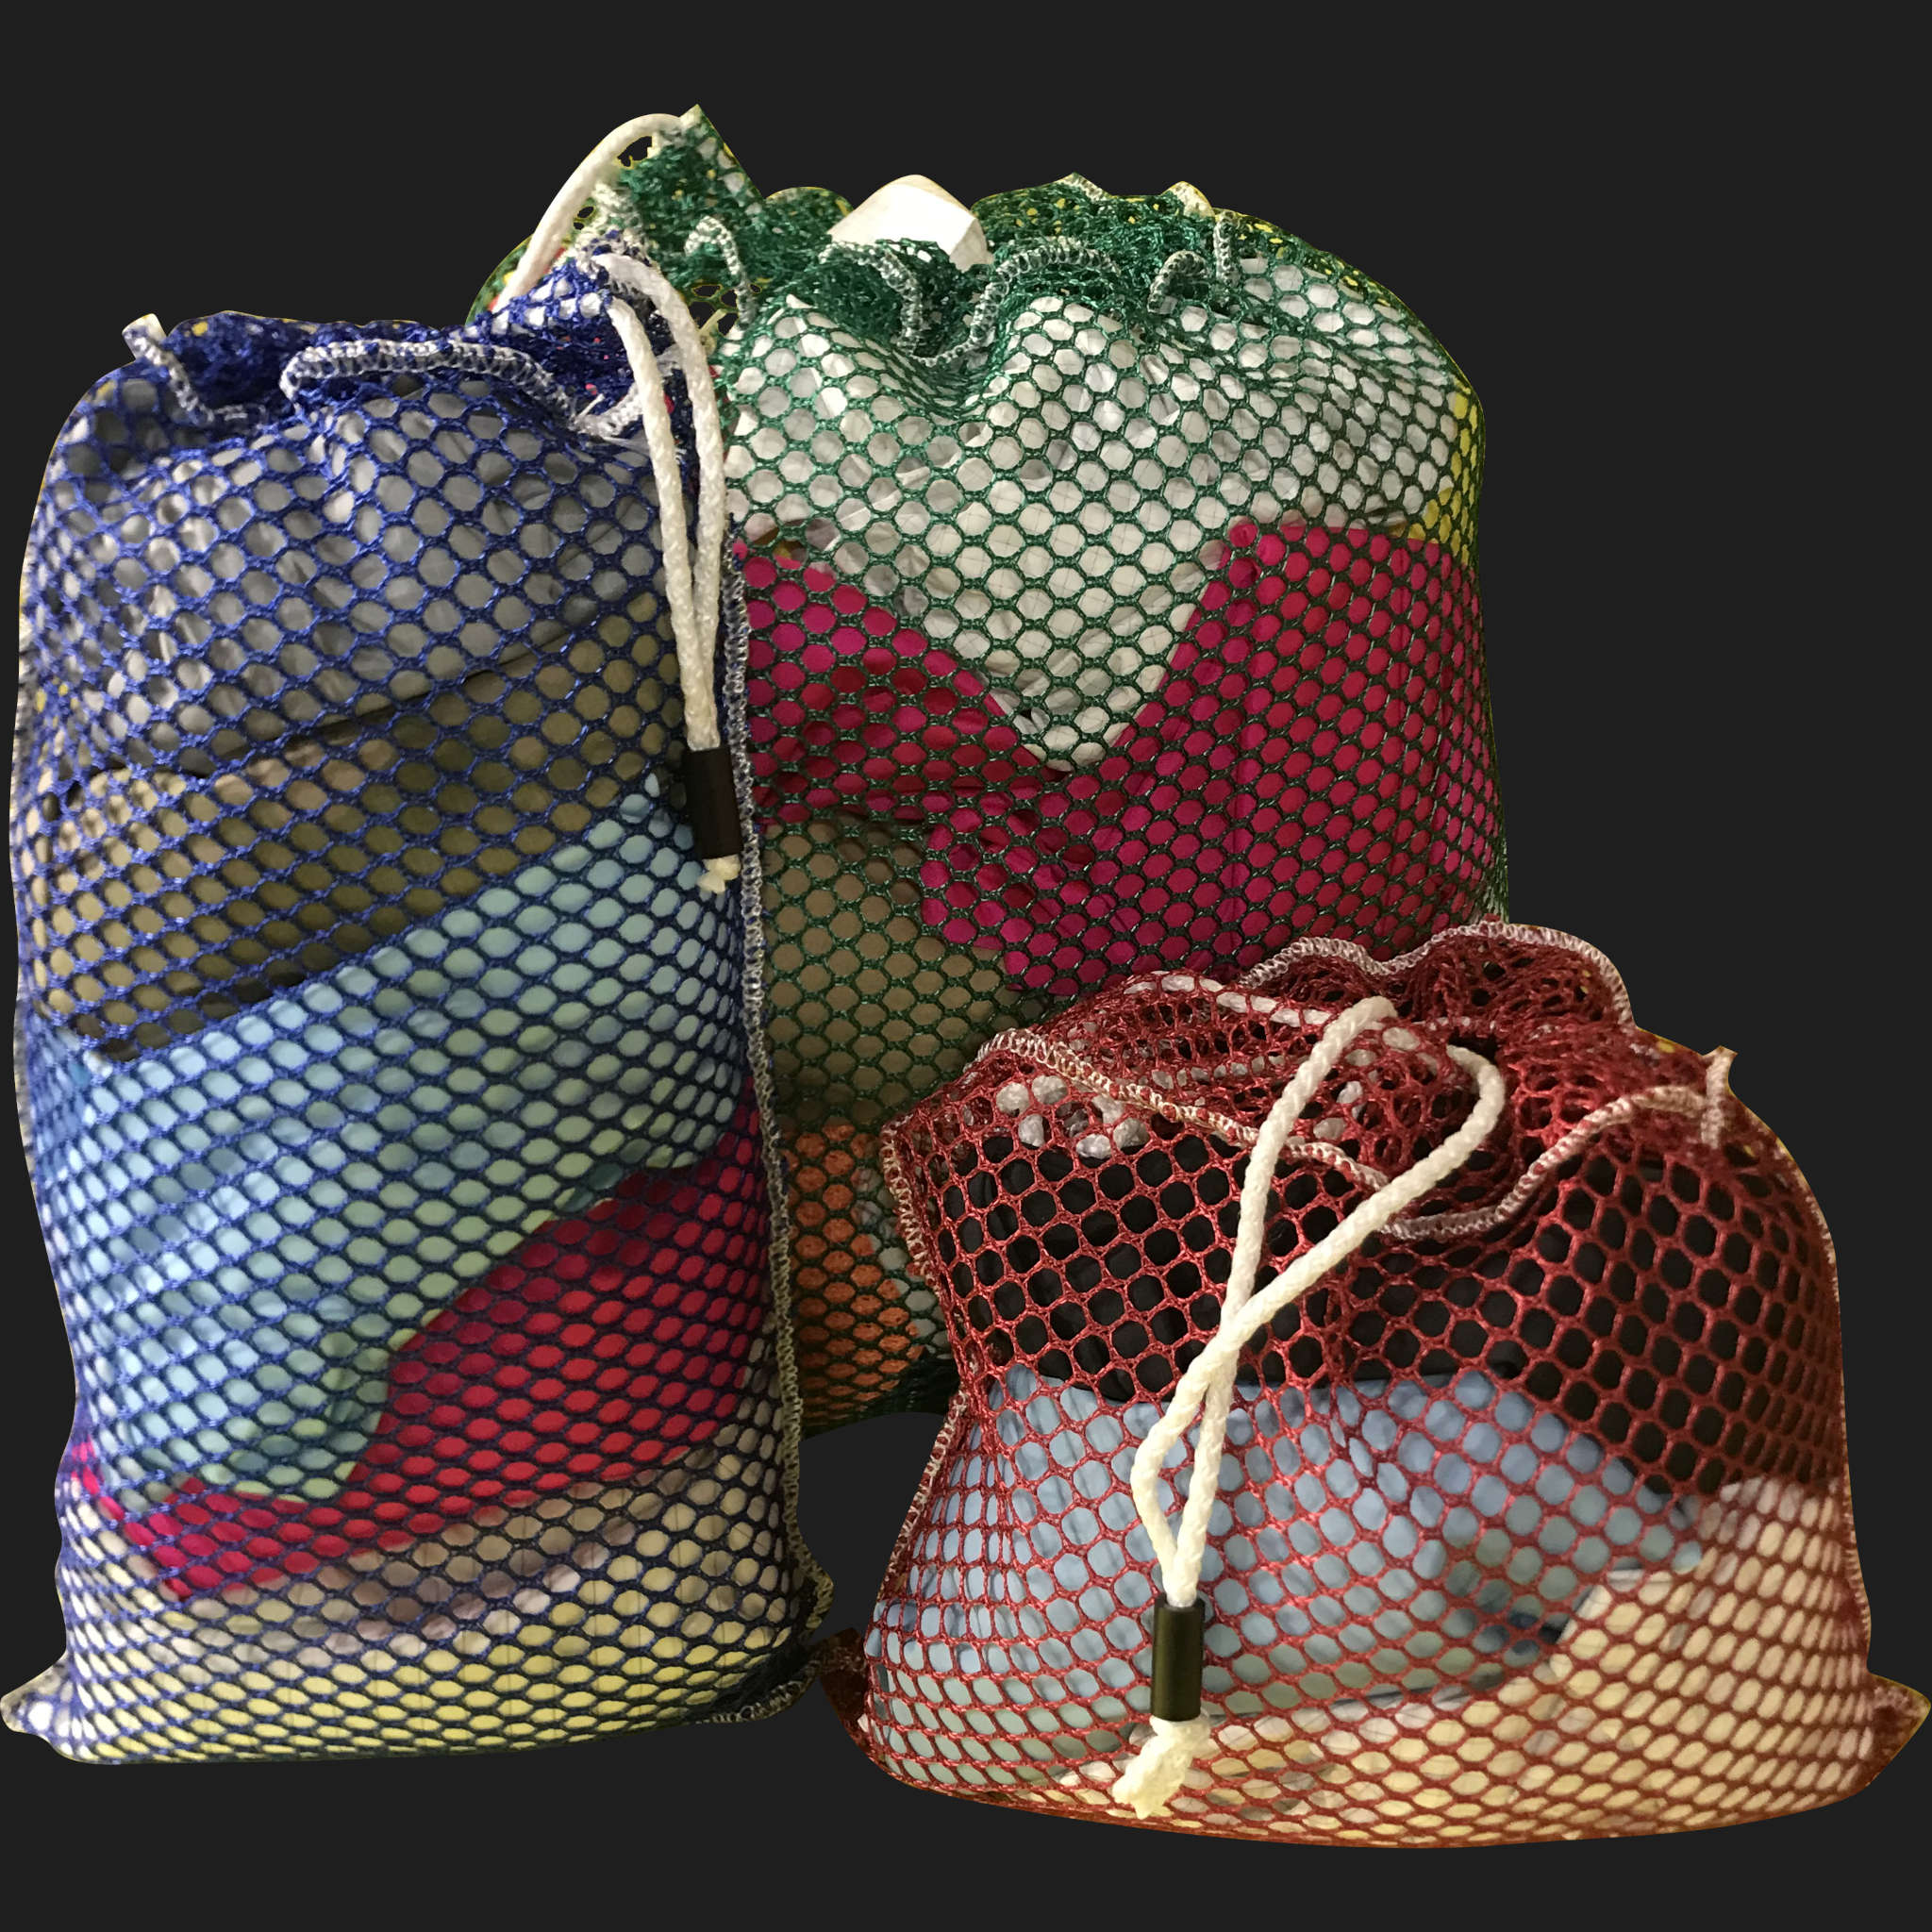 34" x 52" Customized Mesh-Net-Laundry Bags Heavy Duty with Cord and barrellock closure